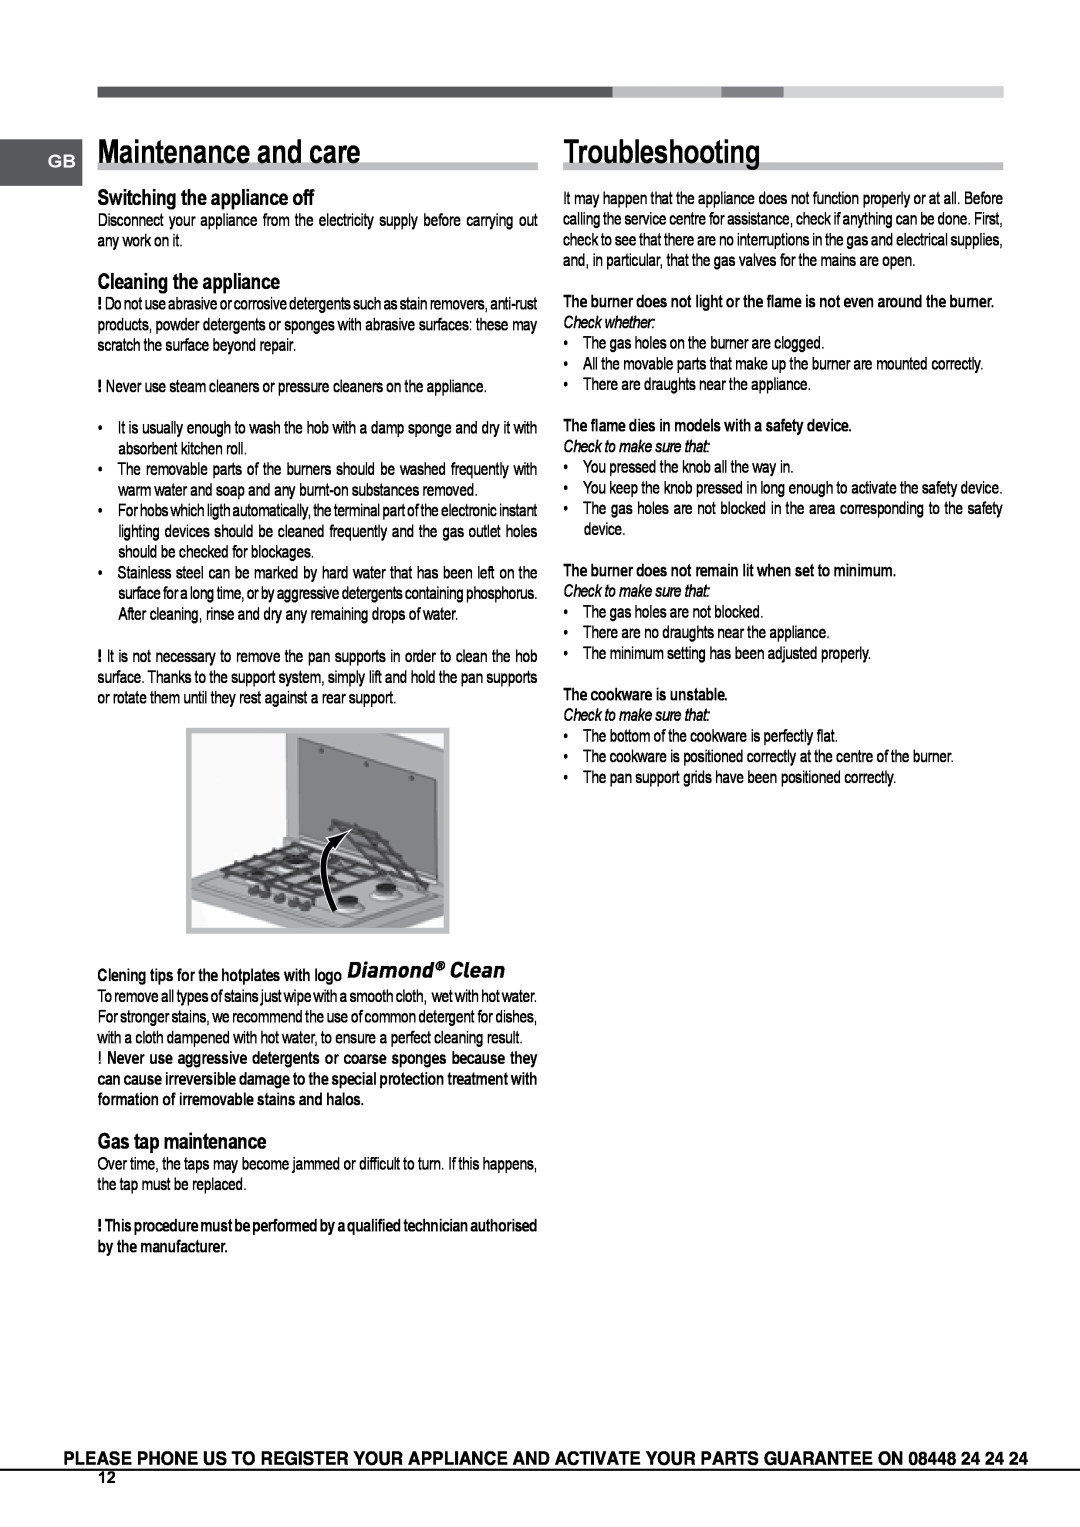 Hotpoint GX641RX, GB630RTX GB Maintenance and care, Troubleshooting, Switching the appliance off, Cleaning the appliance 